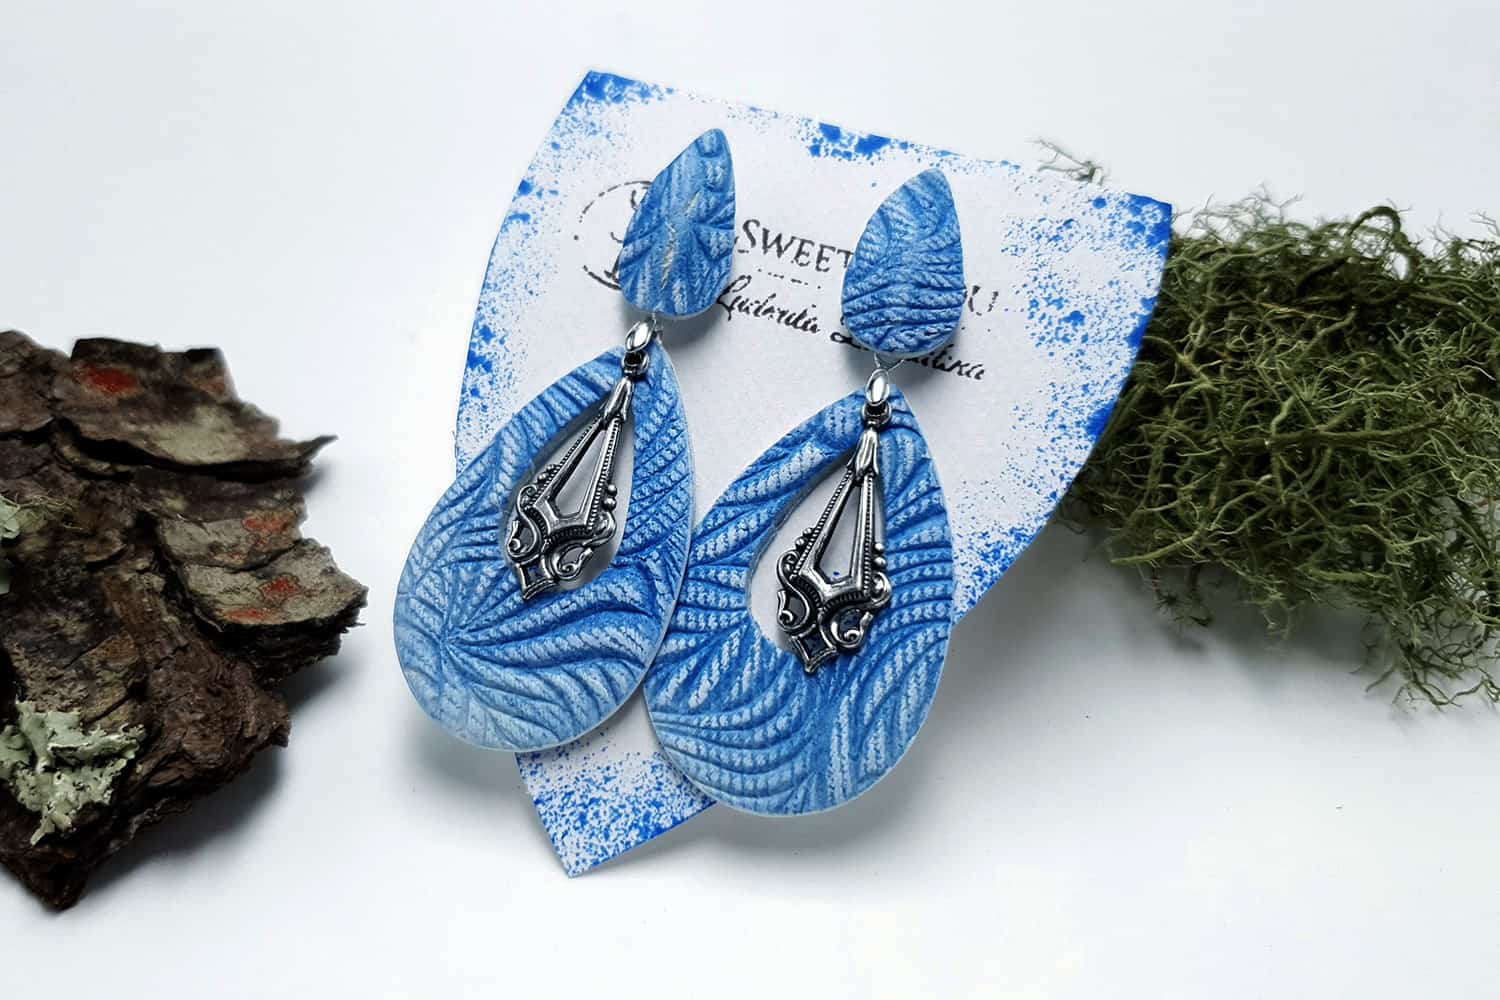 Jewelry from "Faux Jeans/Denim Fabric" course for your inspiration #10